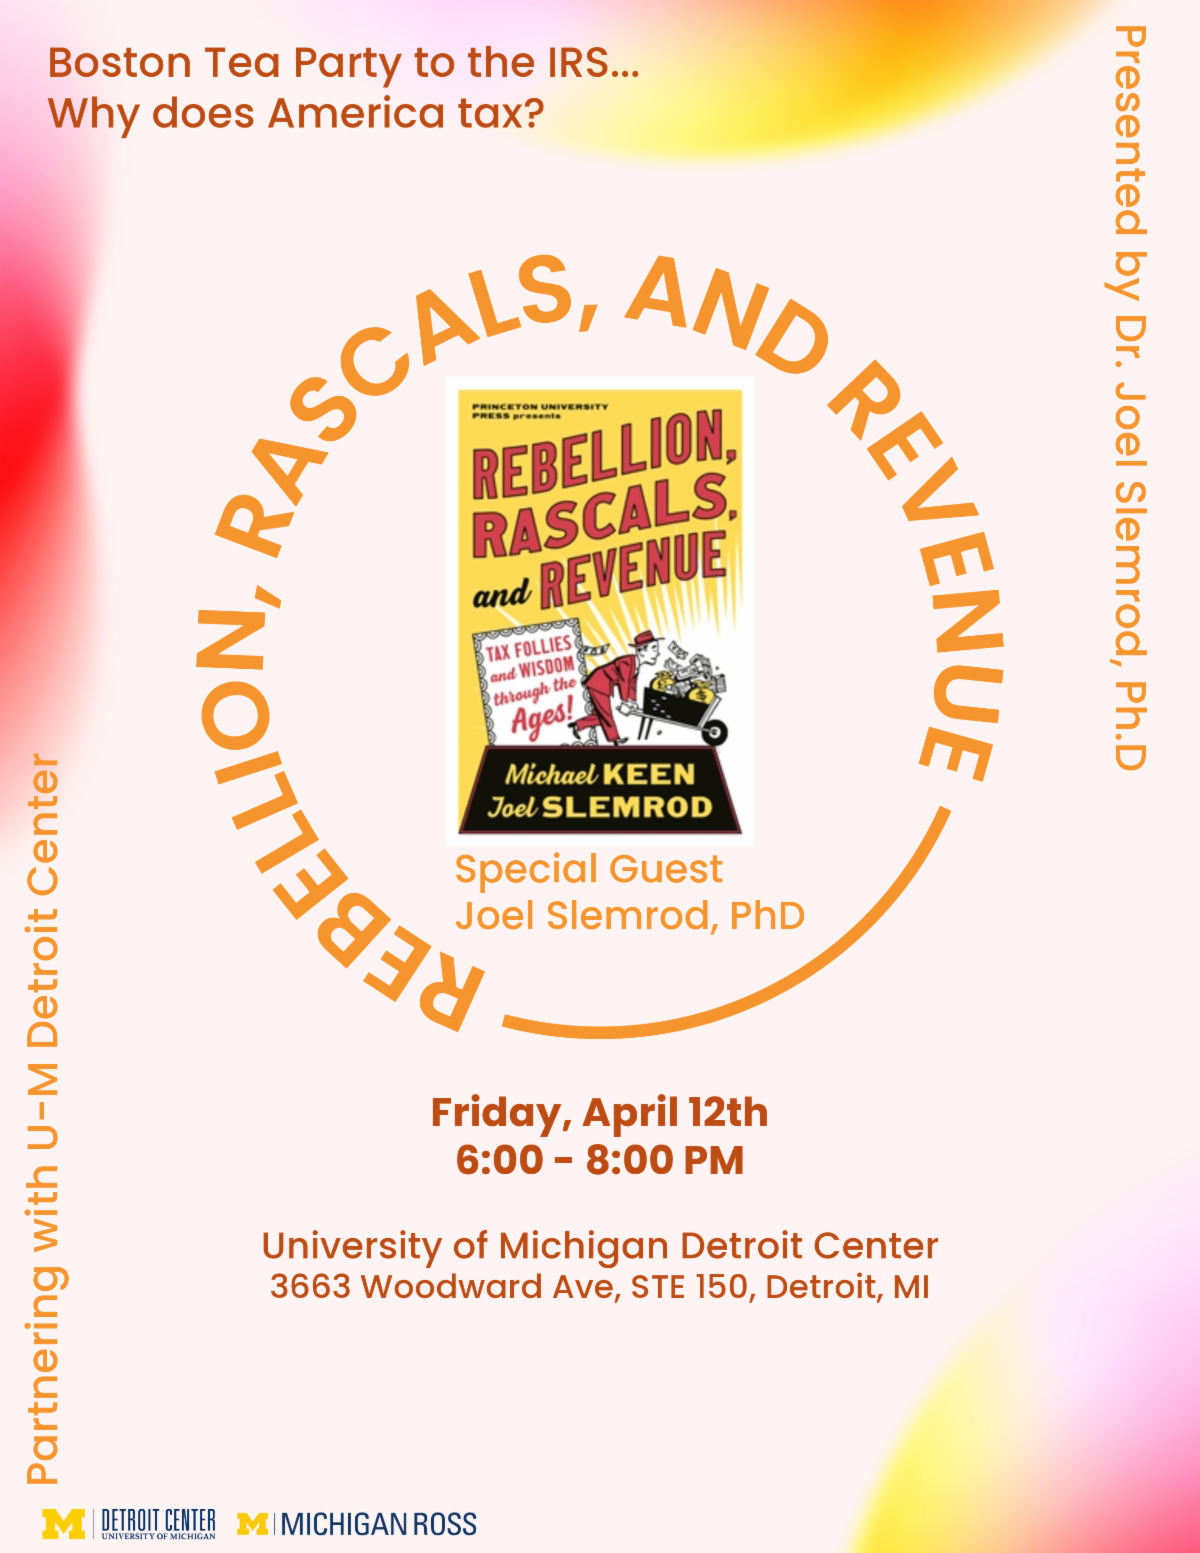 Rebellion, Rascals, and Revenue event flyer with Michael Keen and Joel Slemrod